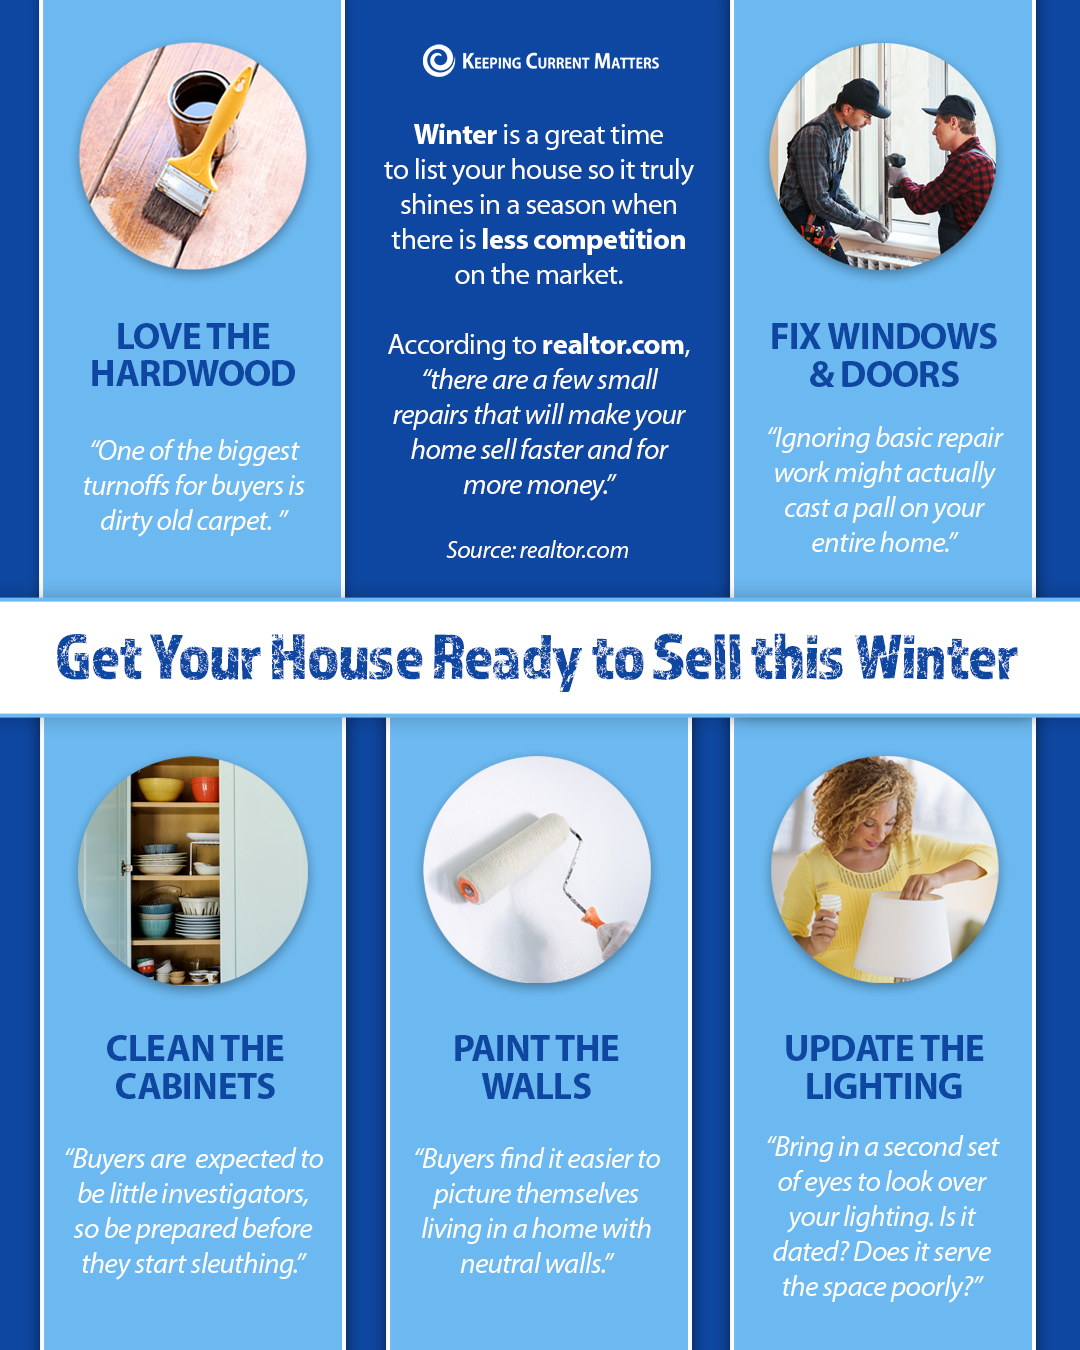 Get Your House Ready To Sell This Winter | Keeping Current Matters